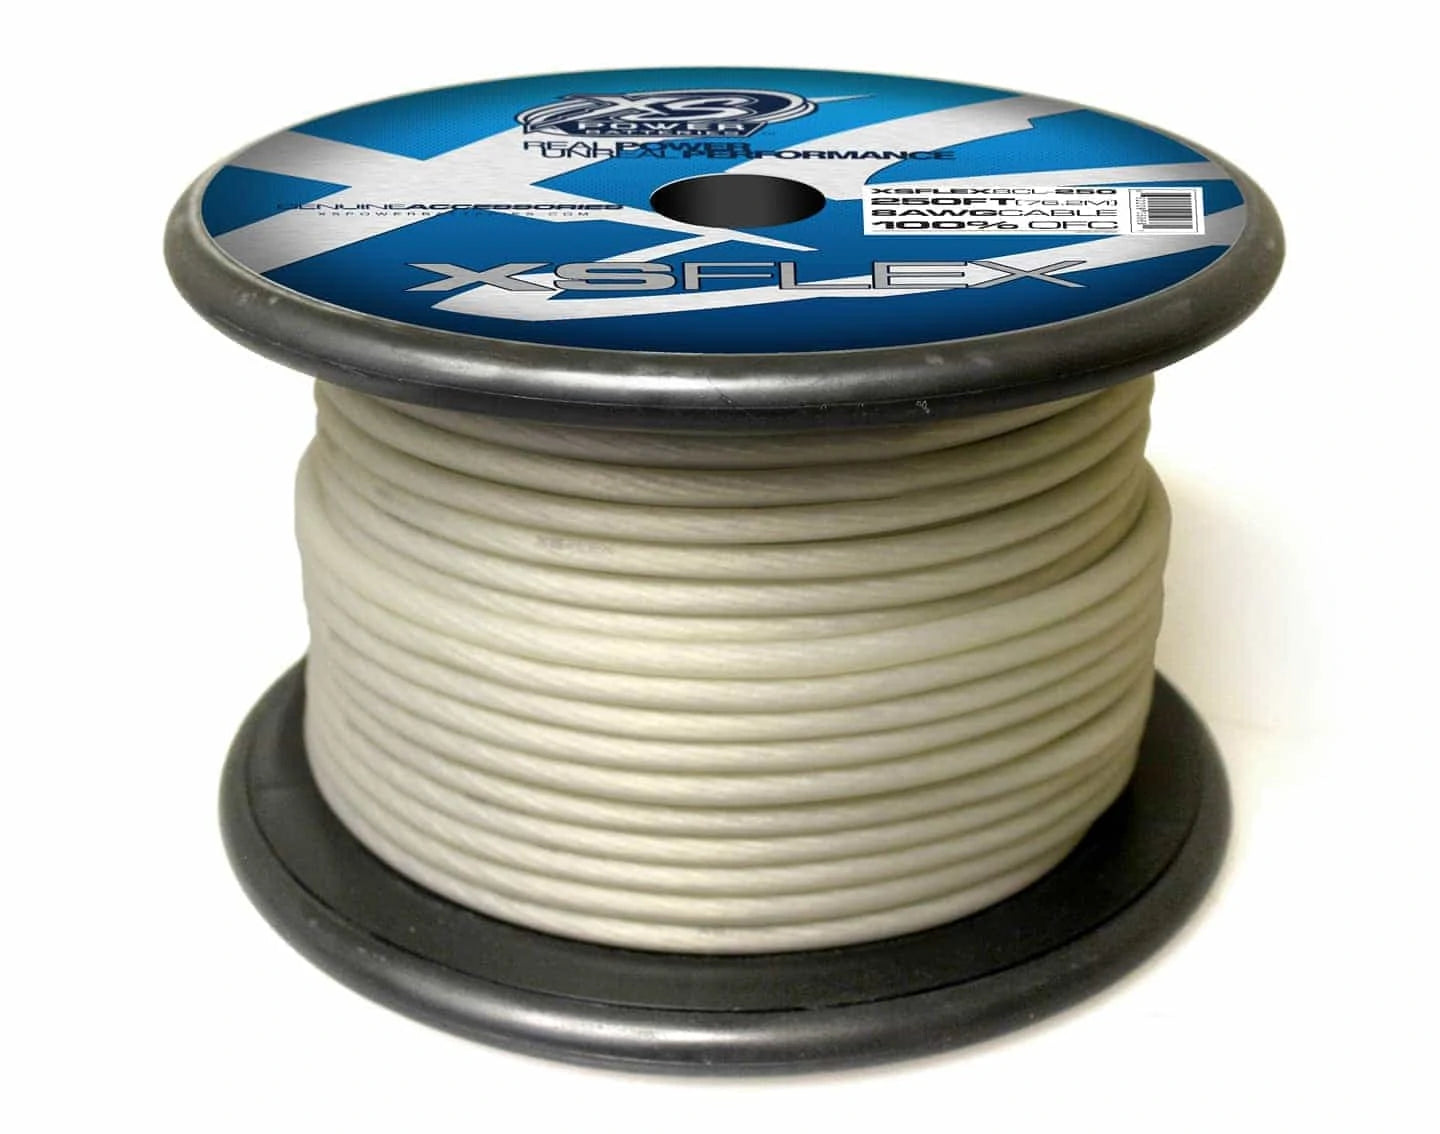 XS Power 8 AWG Gauge XS Flex 100% Oxygen Free Tinned Copper Power and Ground Cable 250ft Spool Electrical Wire